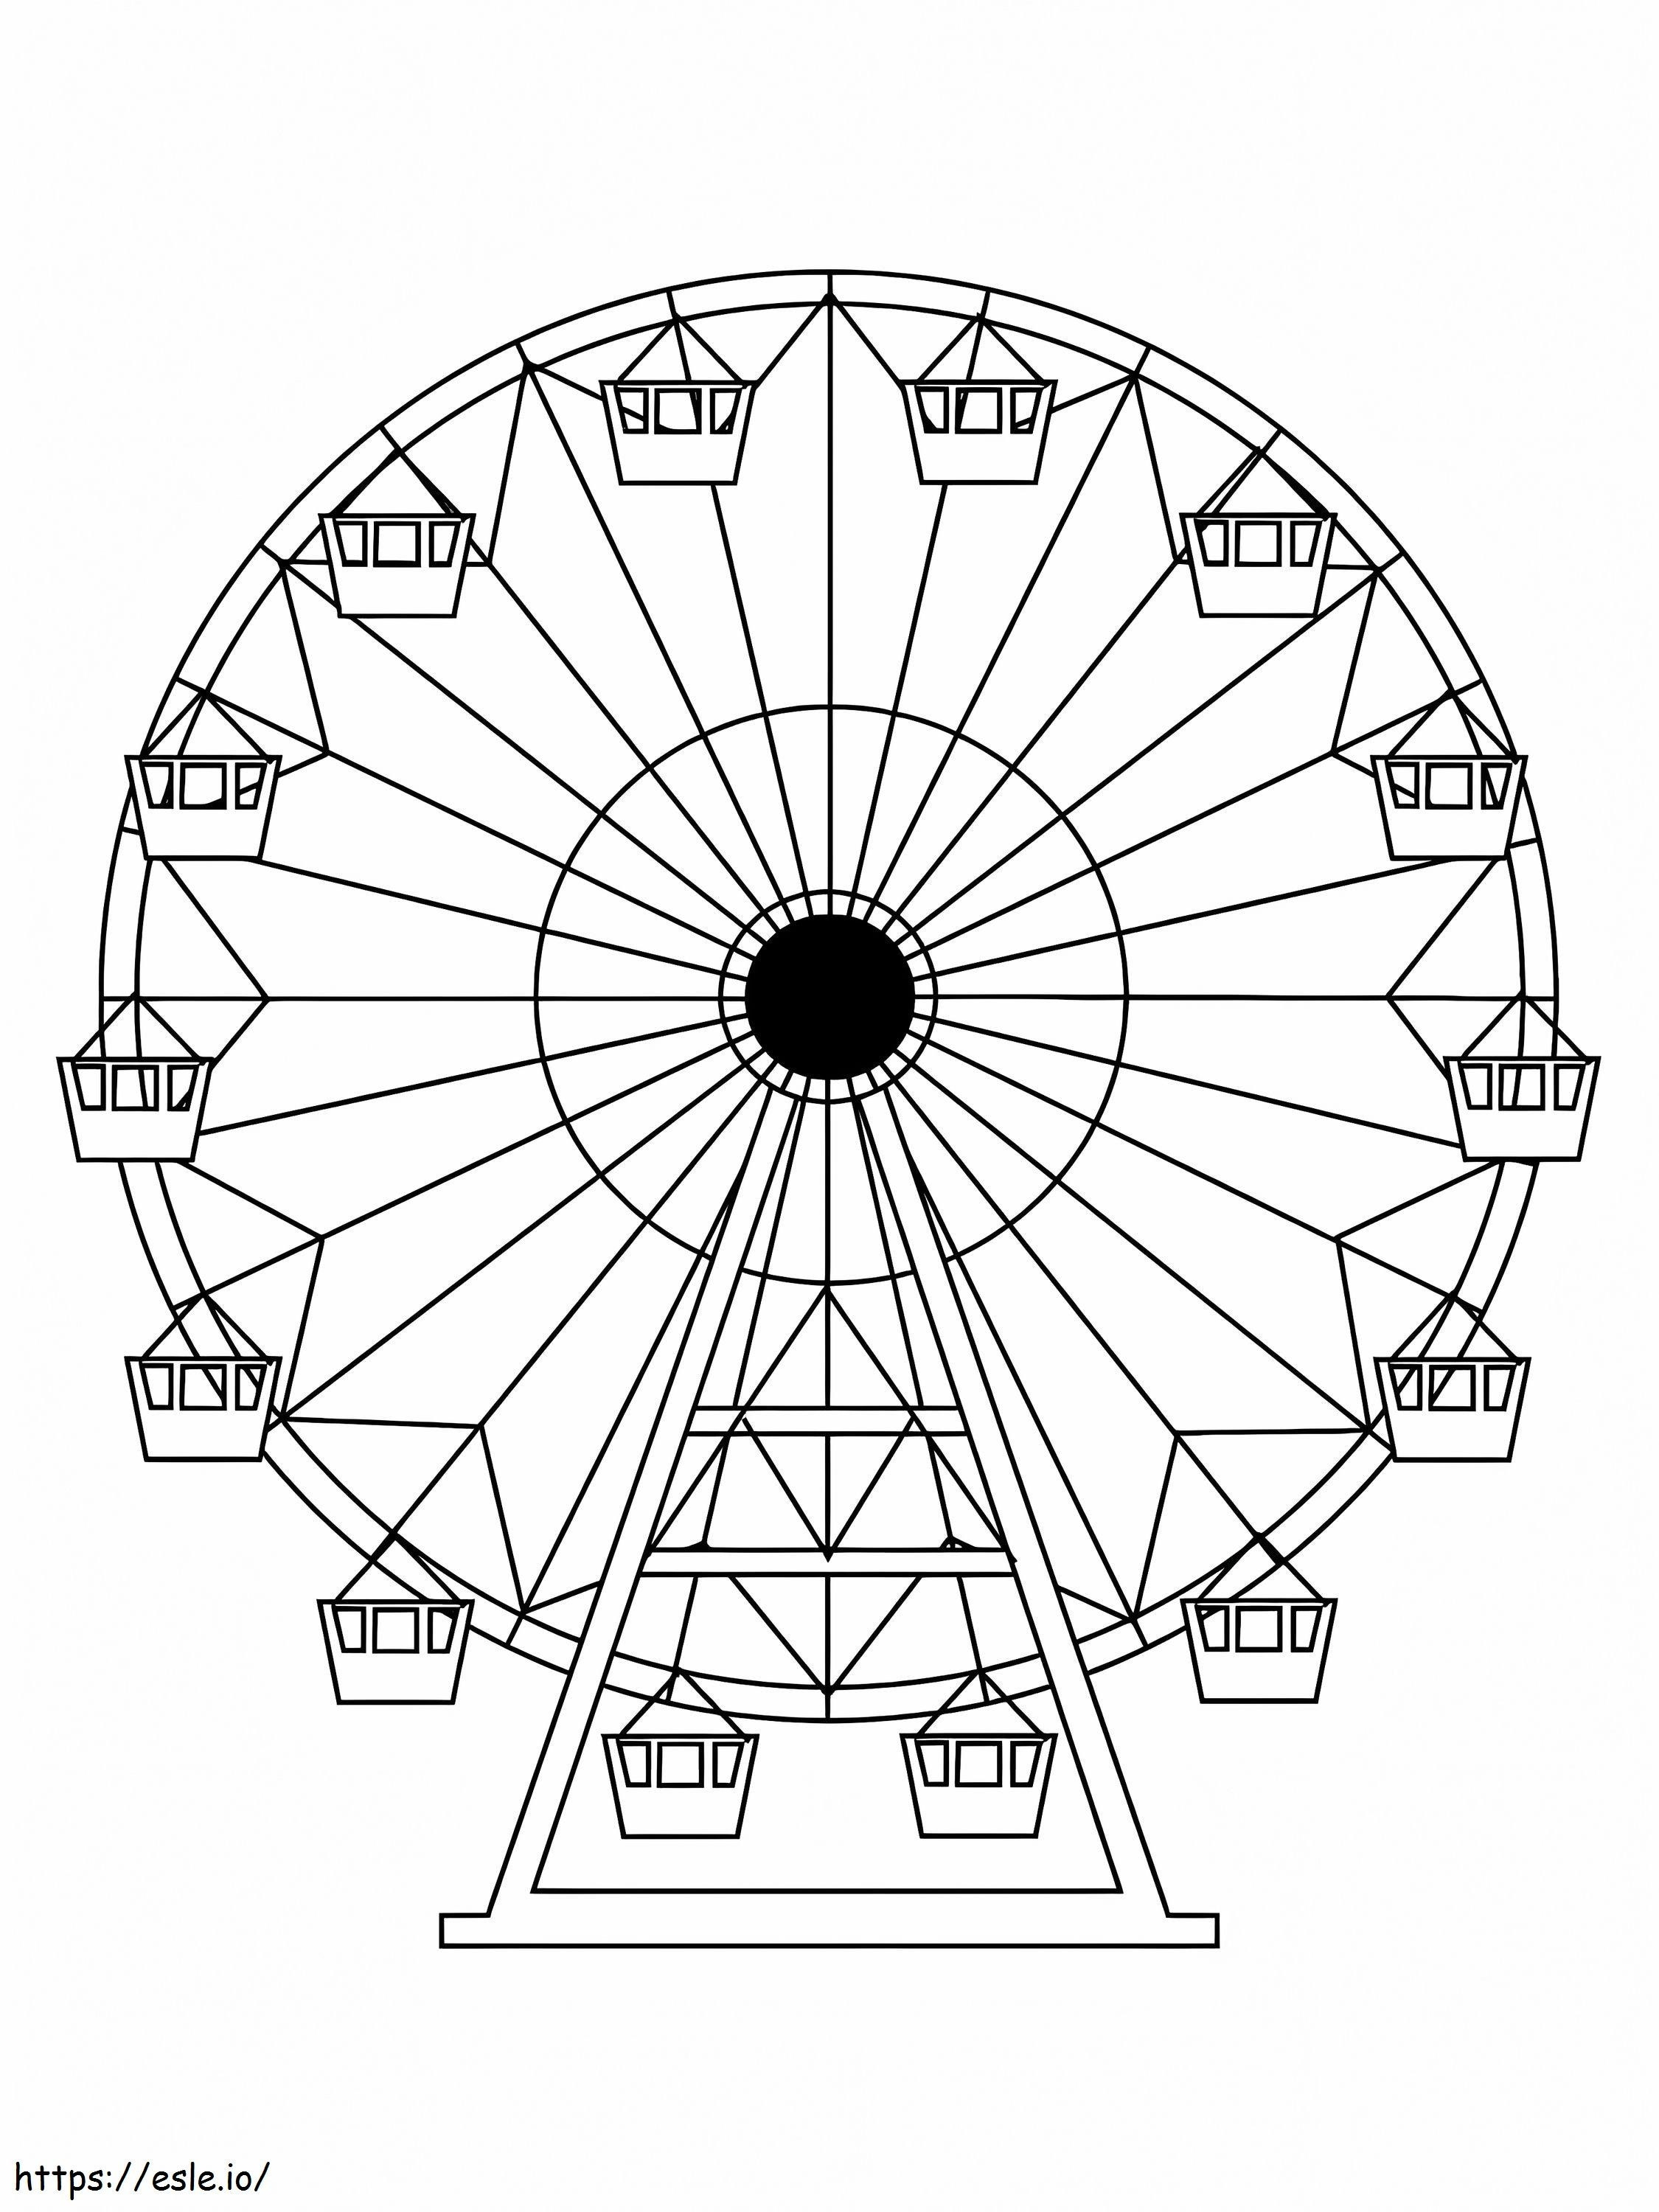 Ferris Wheel 1 coloring page